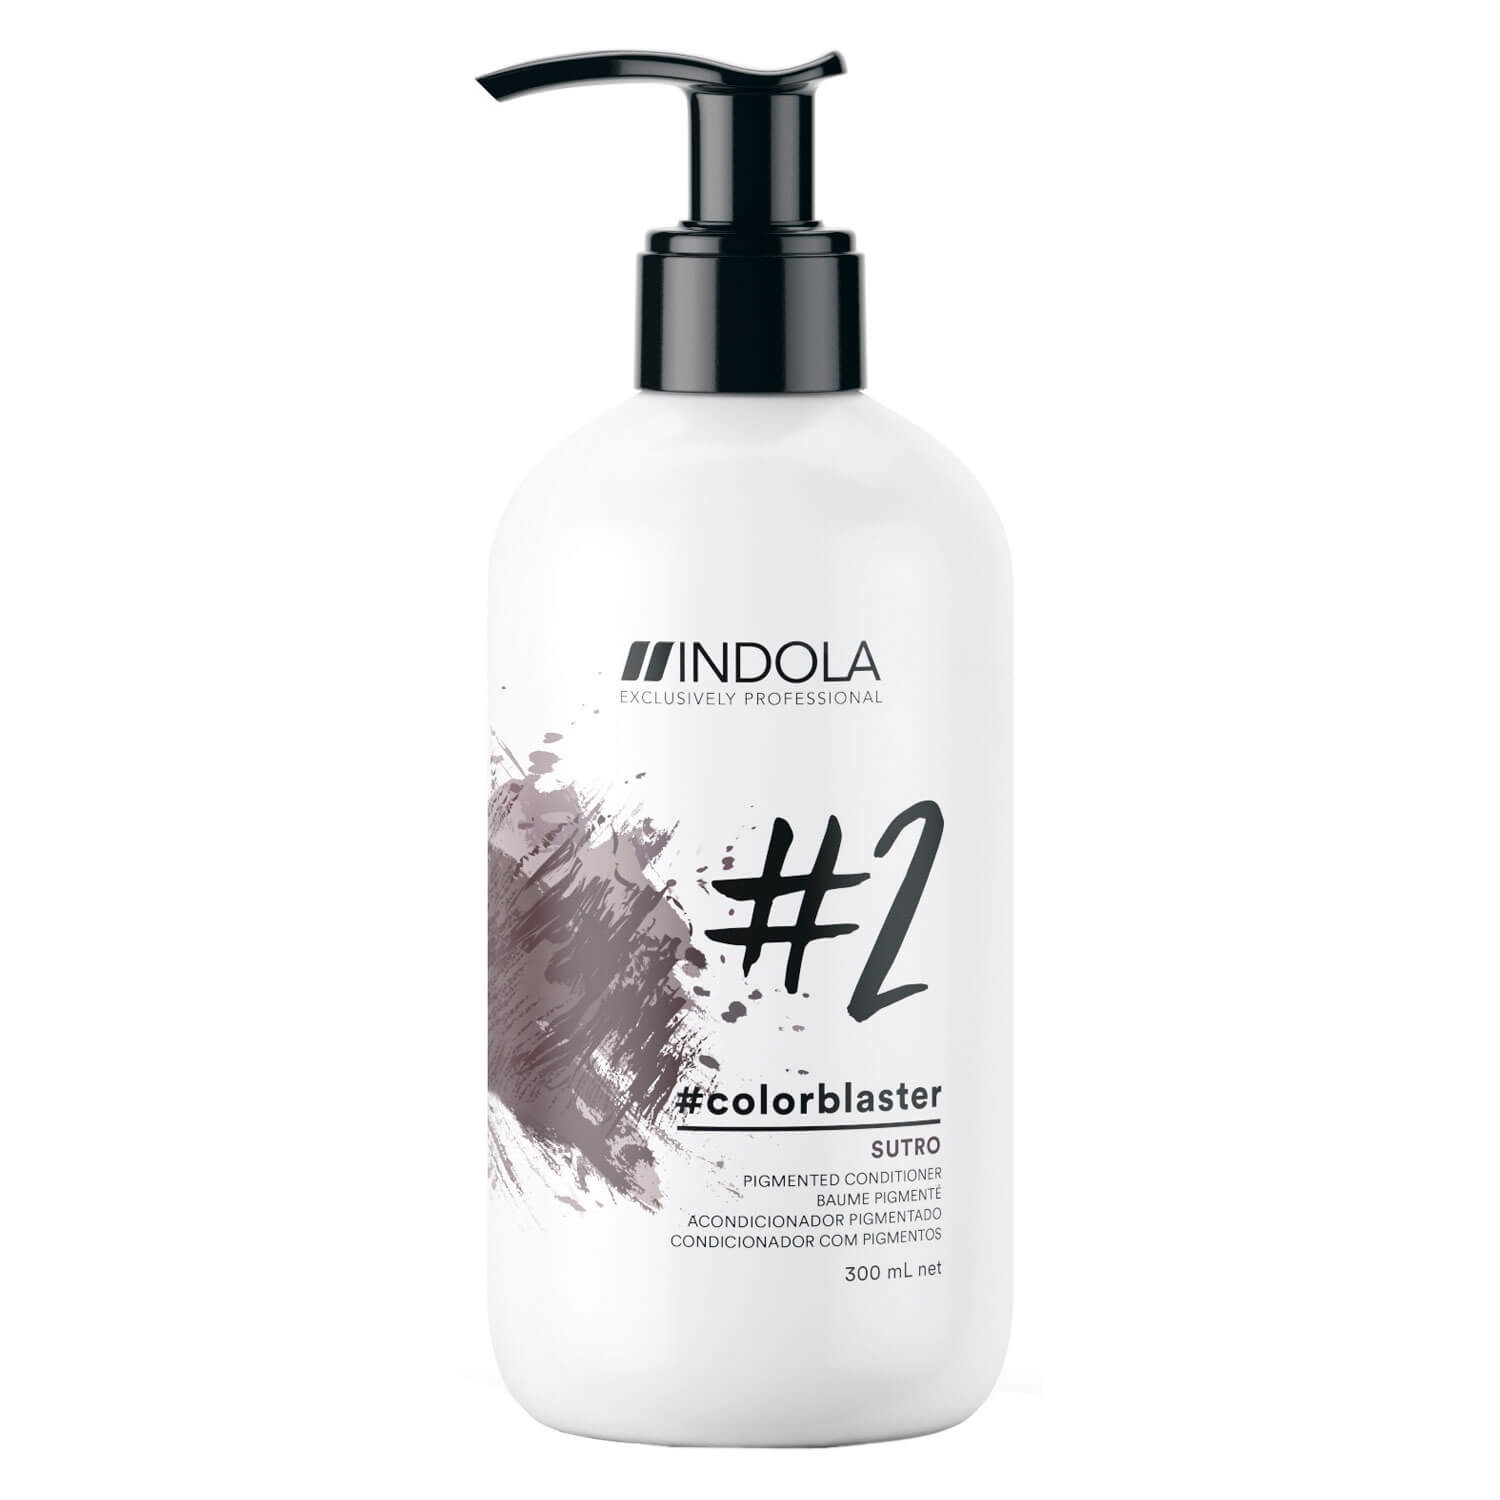 Product image from colorblaster - Pigmented Conditioner Sutro